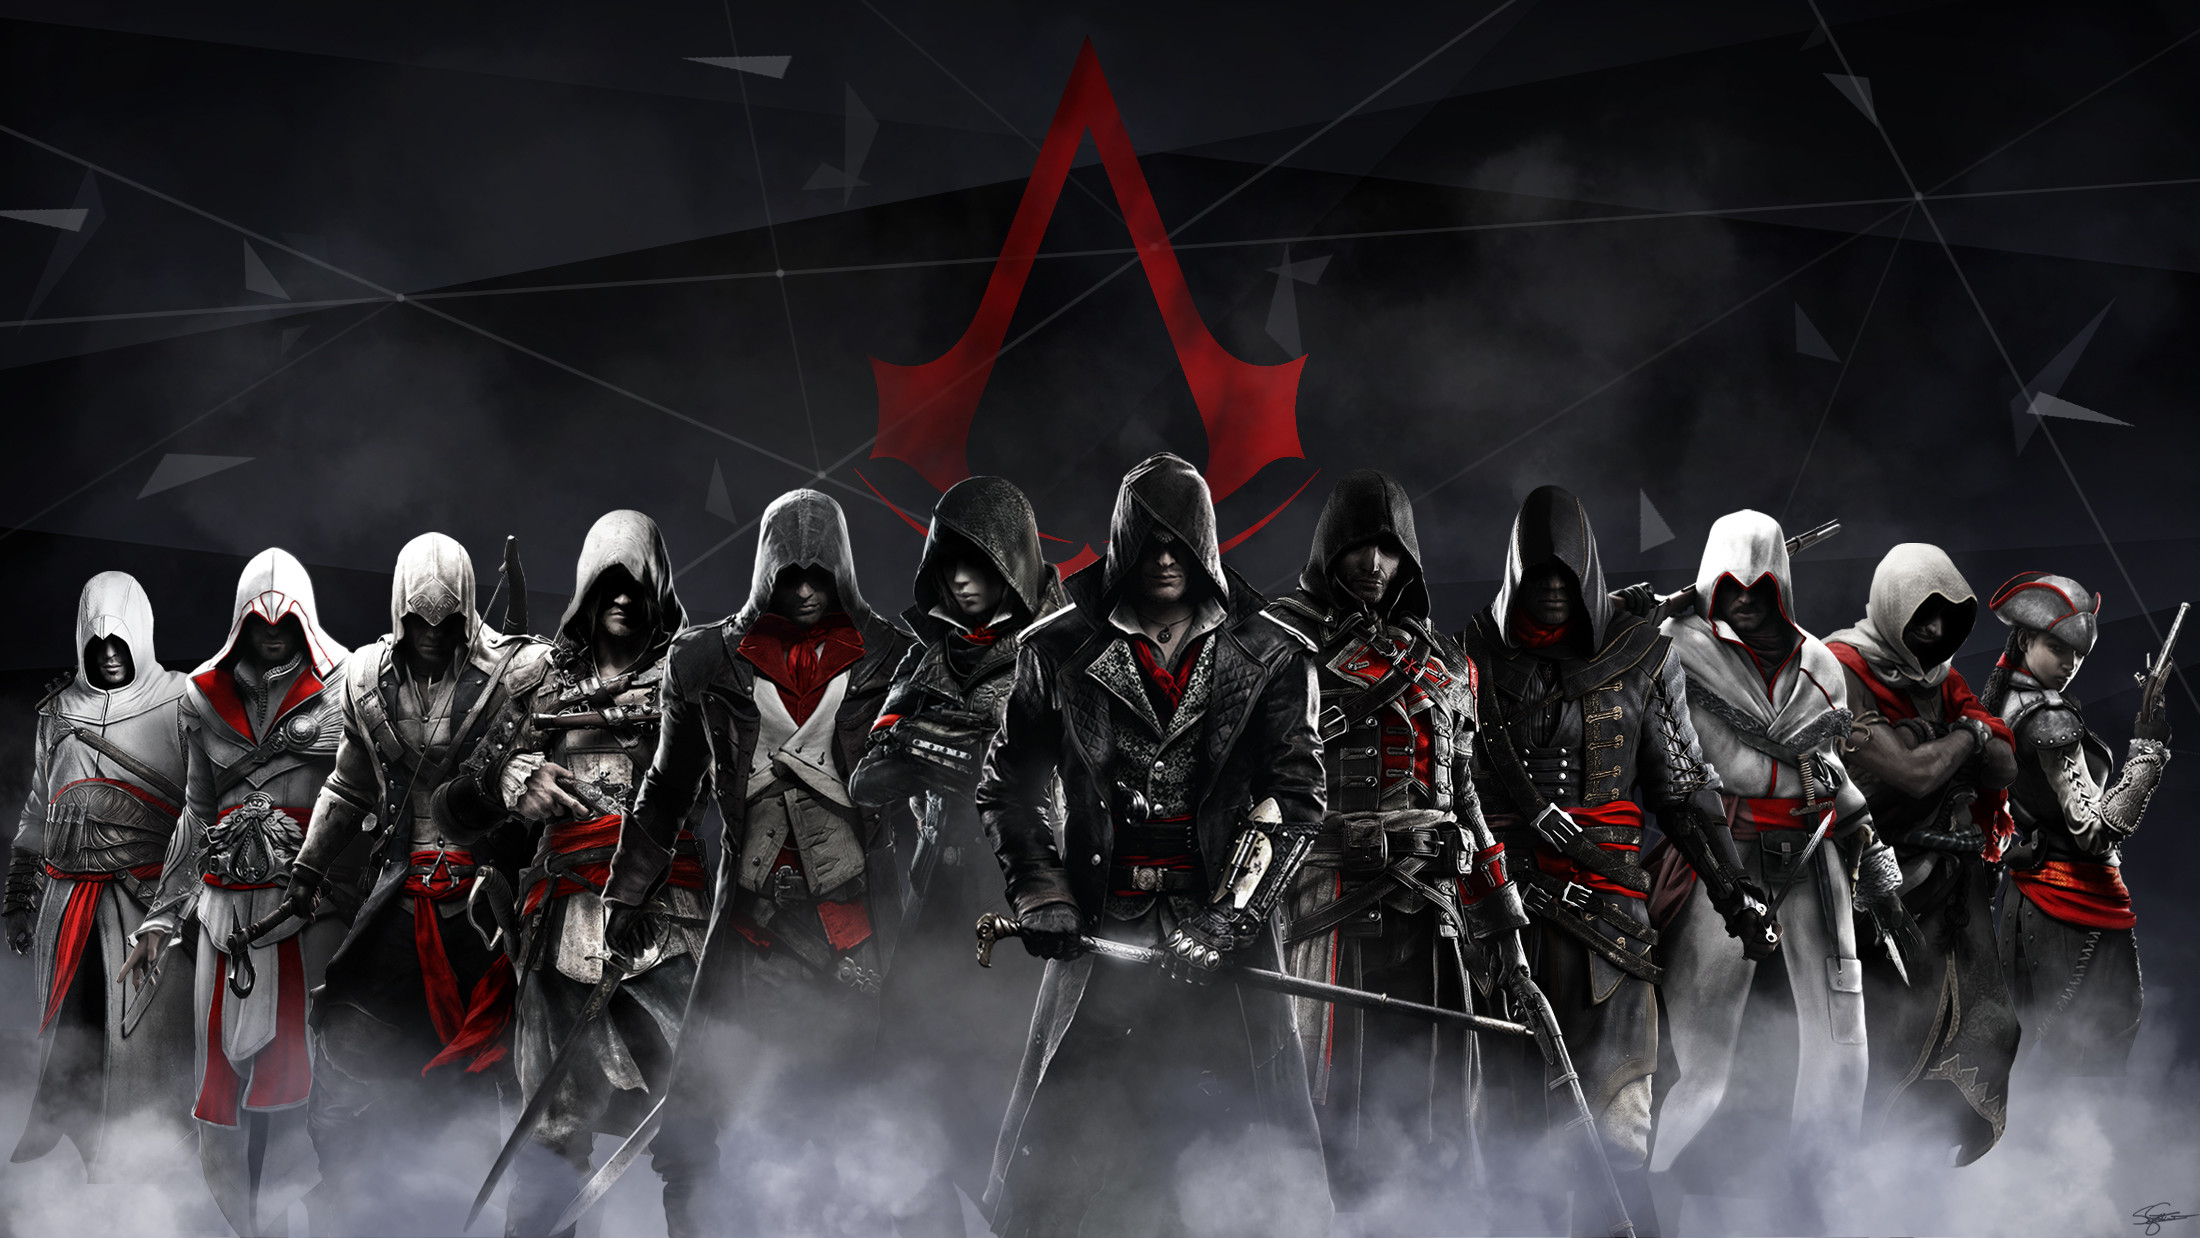 2200x1238 Video Game - Assassin's Creed Wallpaper